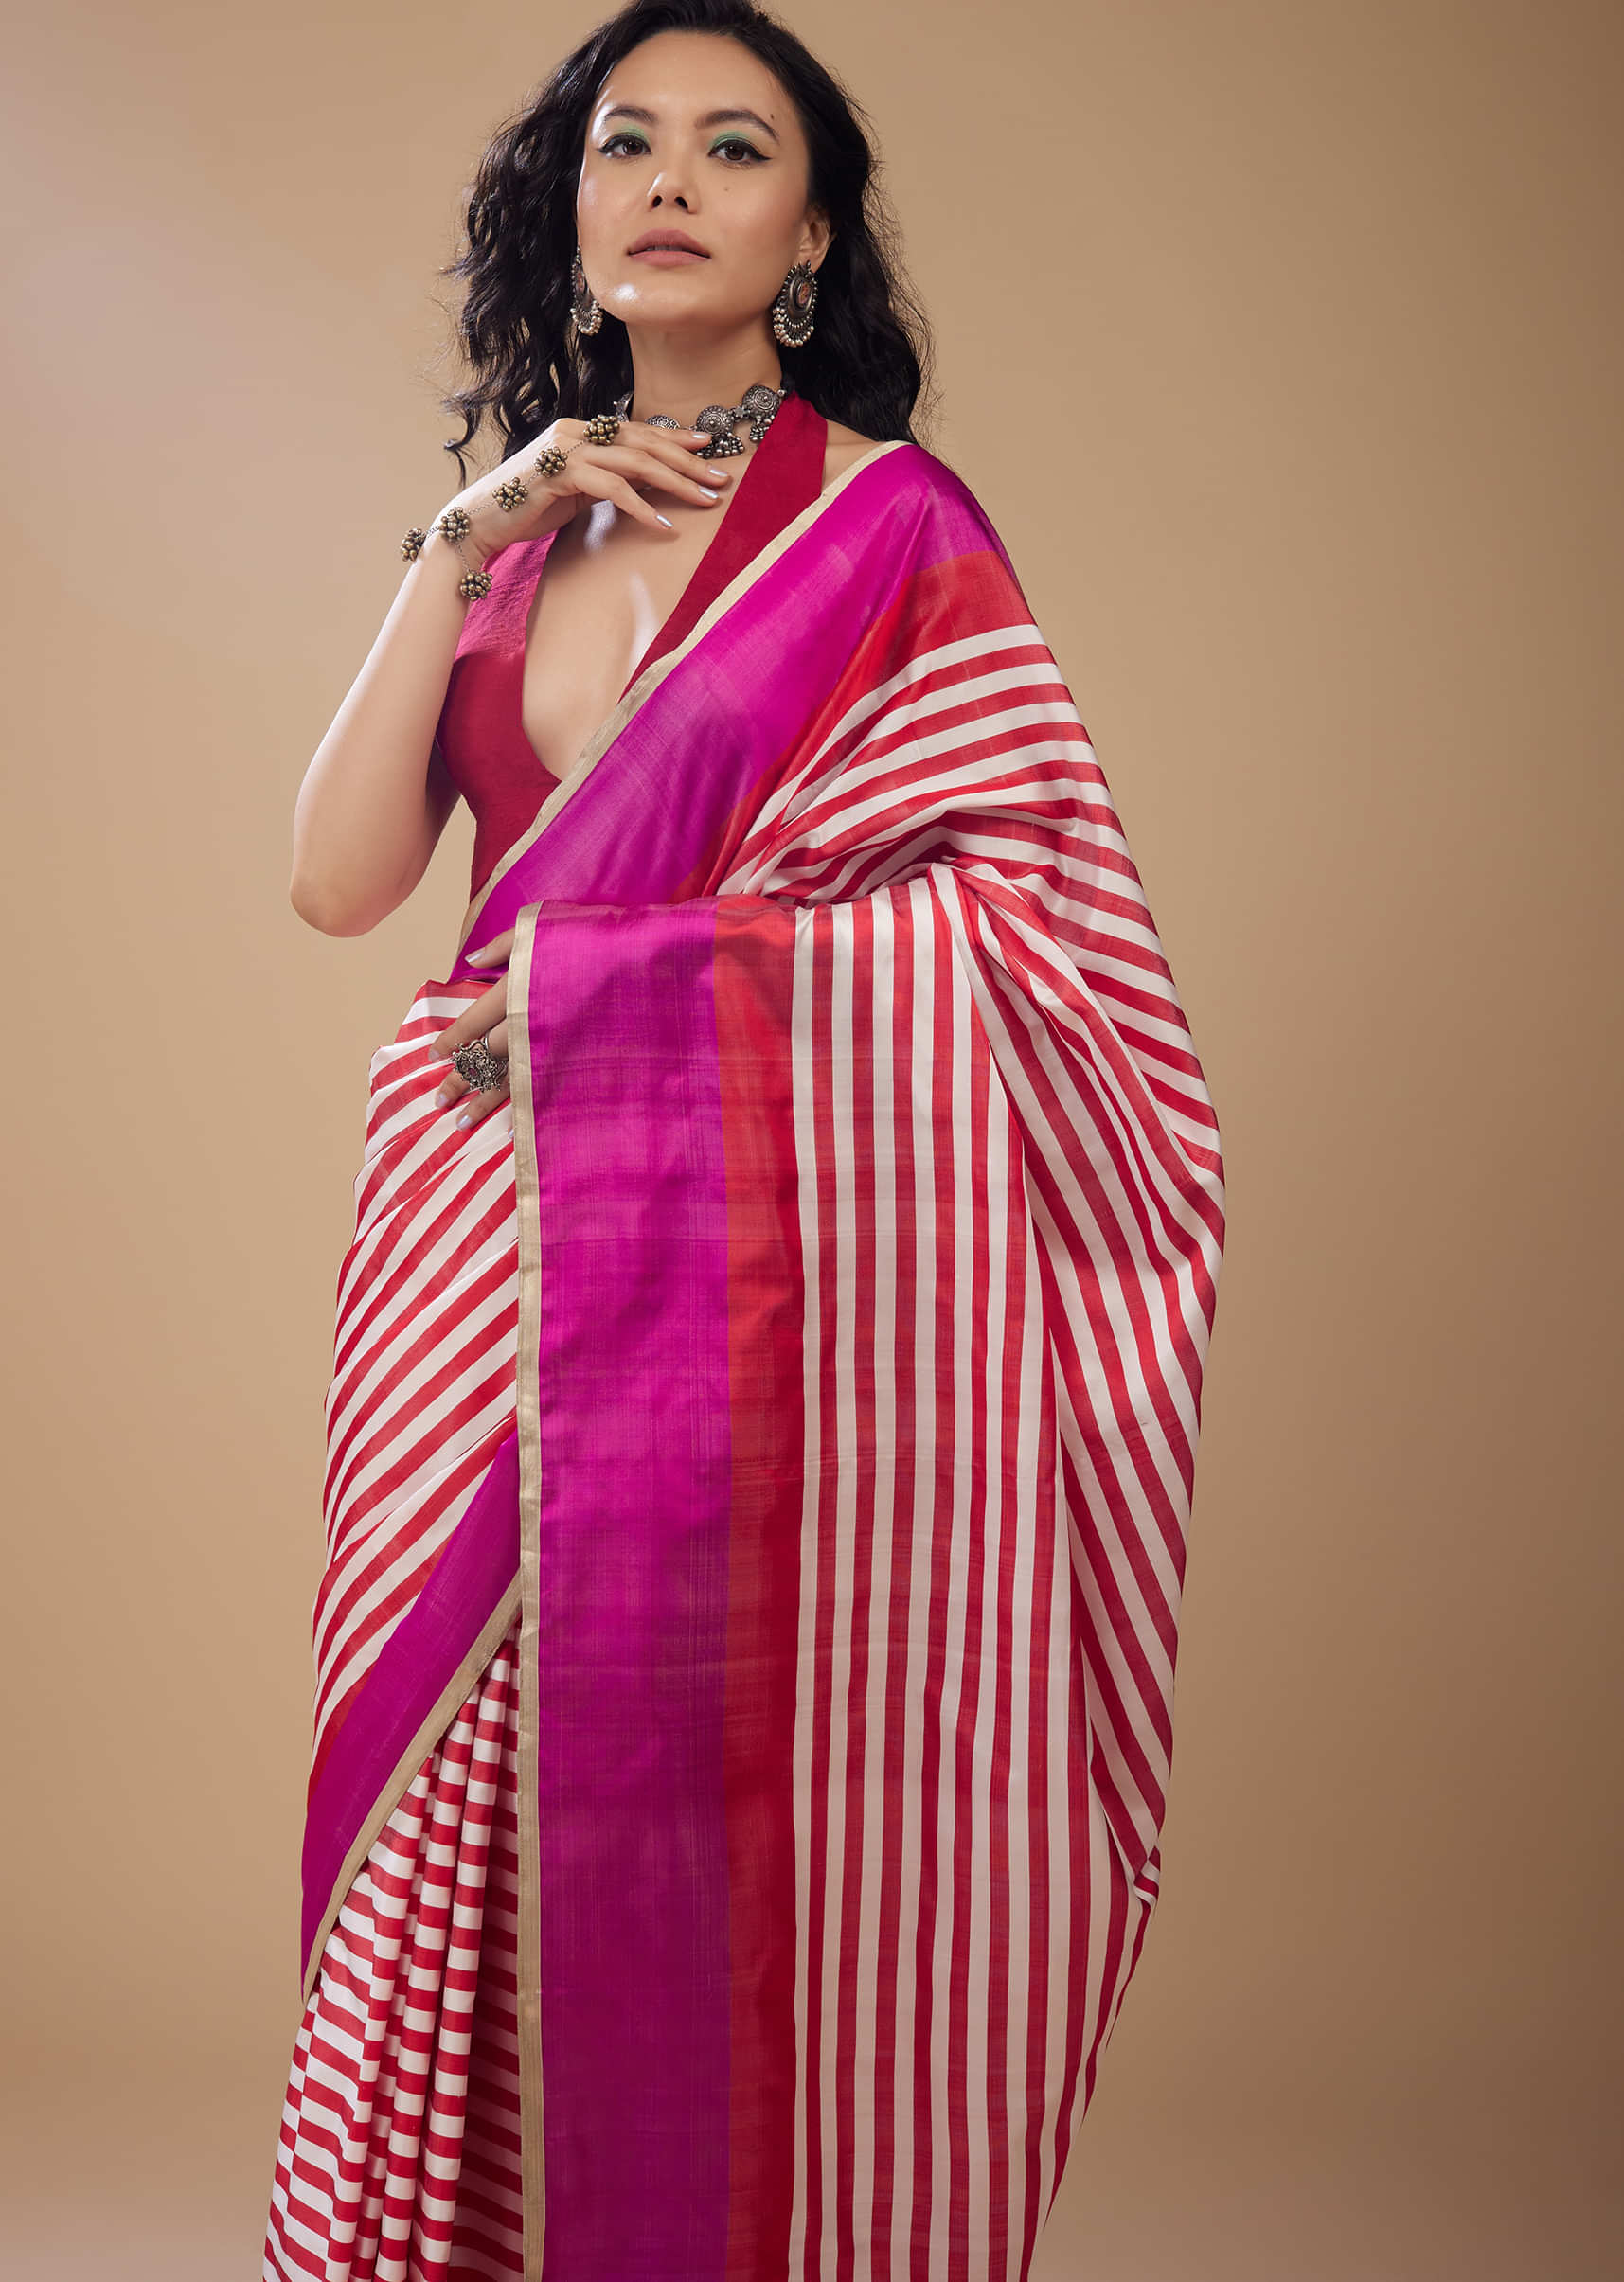 Fiery Red Printed Satin Saree With Dual Tone Stripes